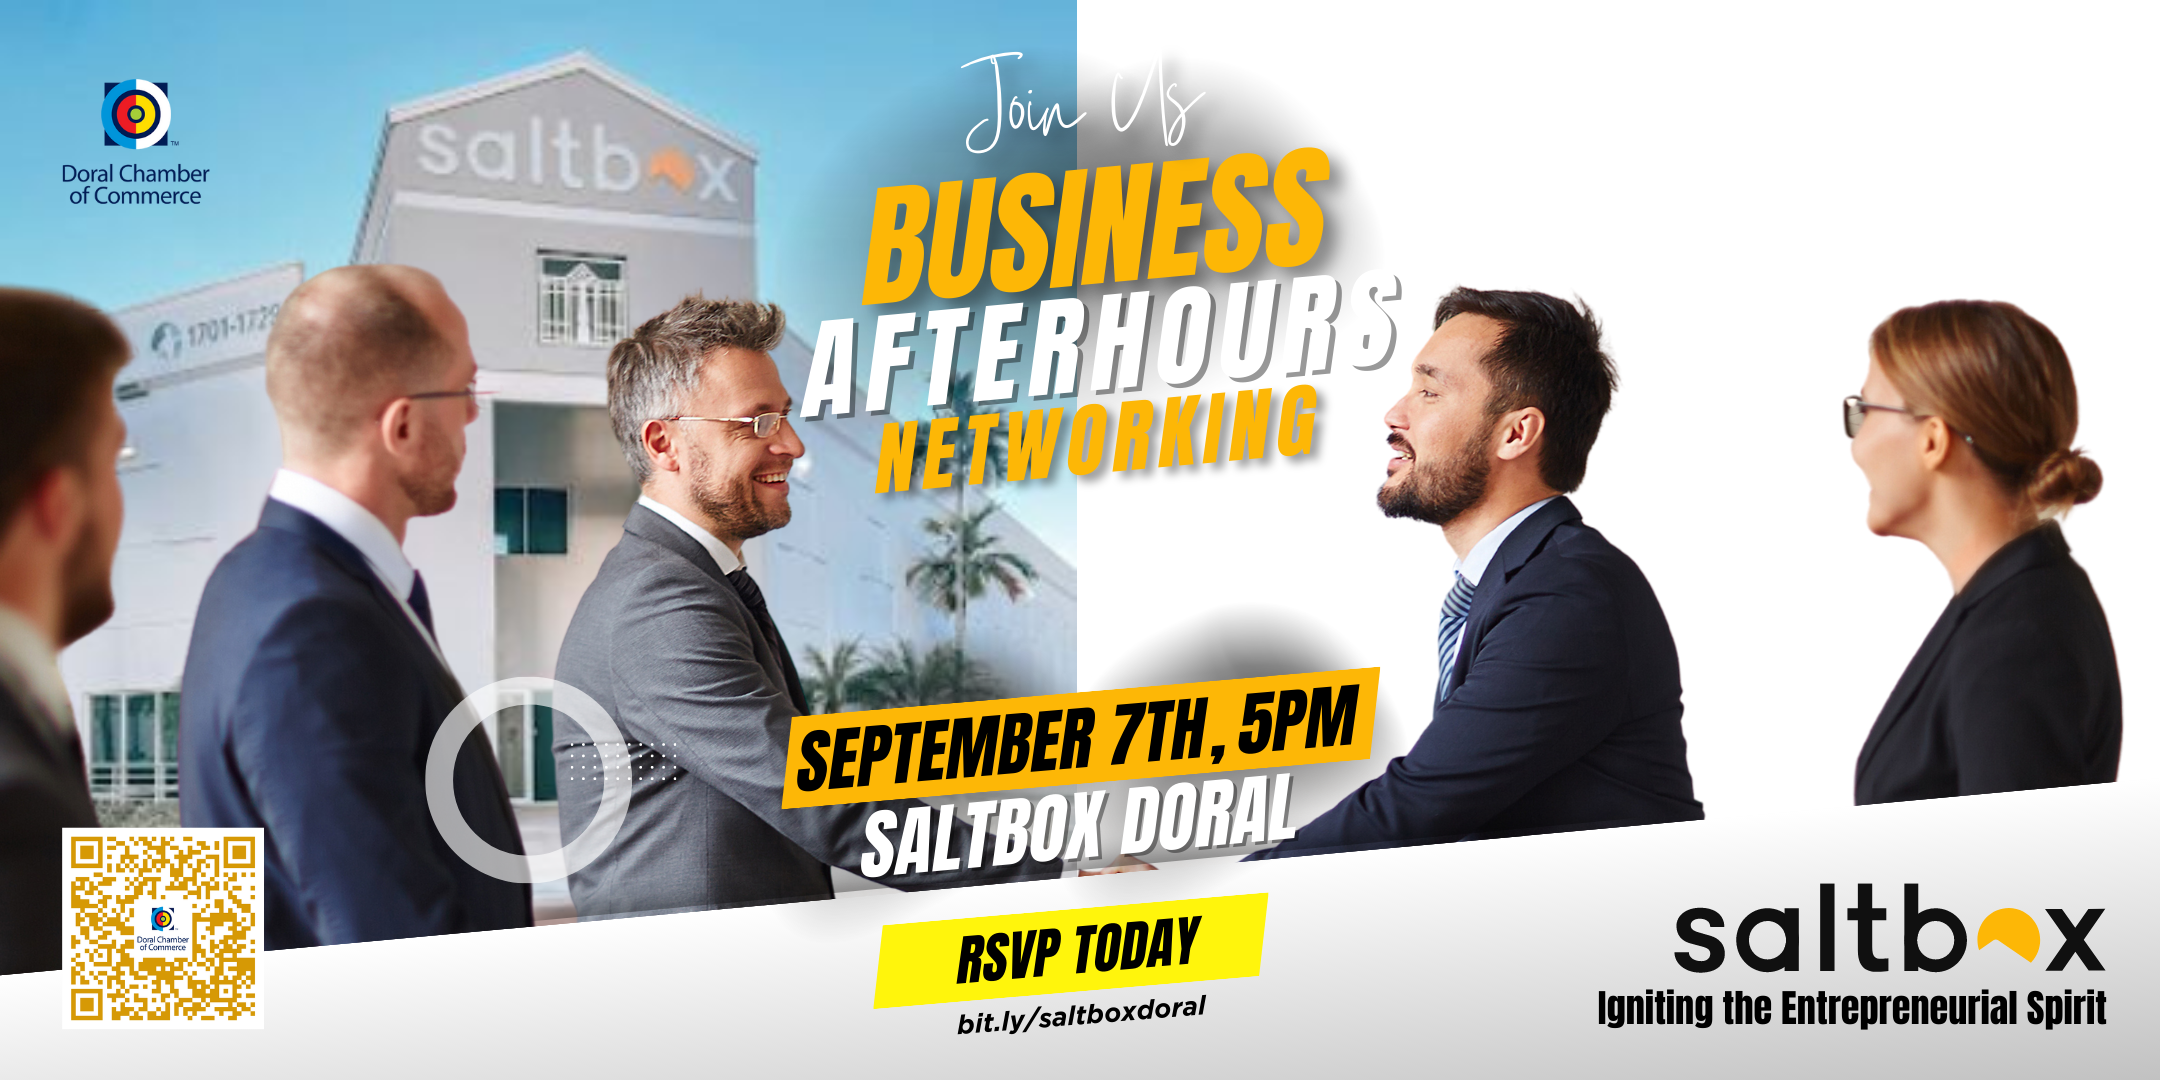 Saltbox Business Afterhours Doral Chamber of Commerce